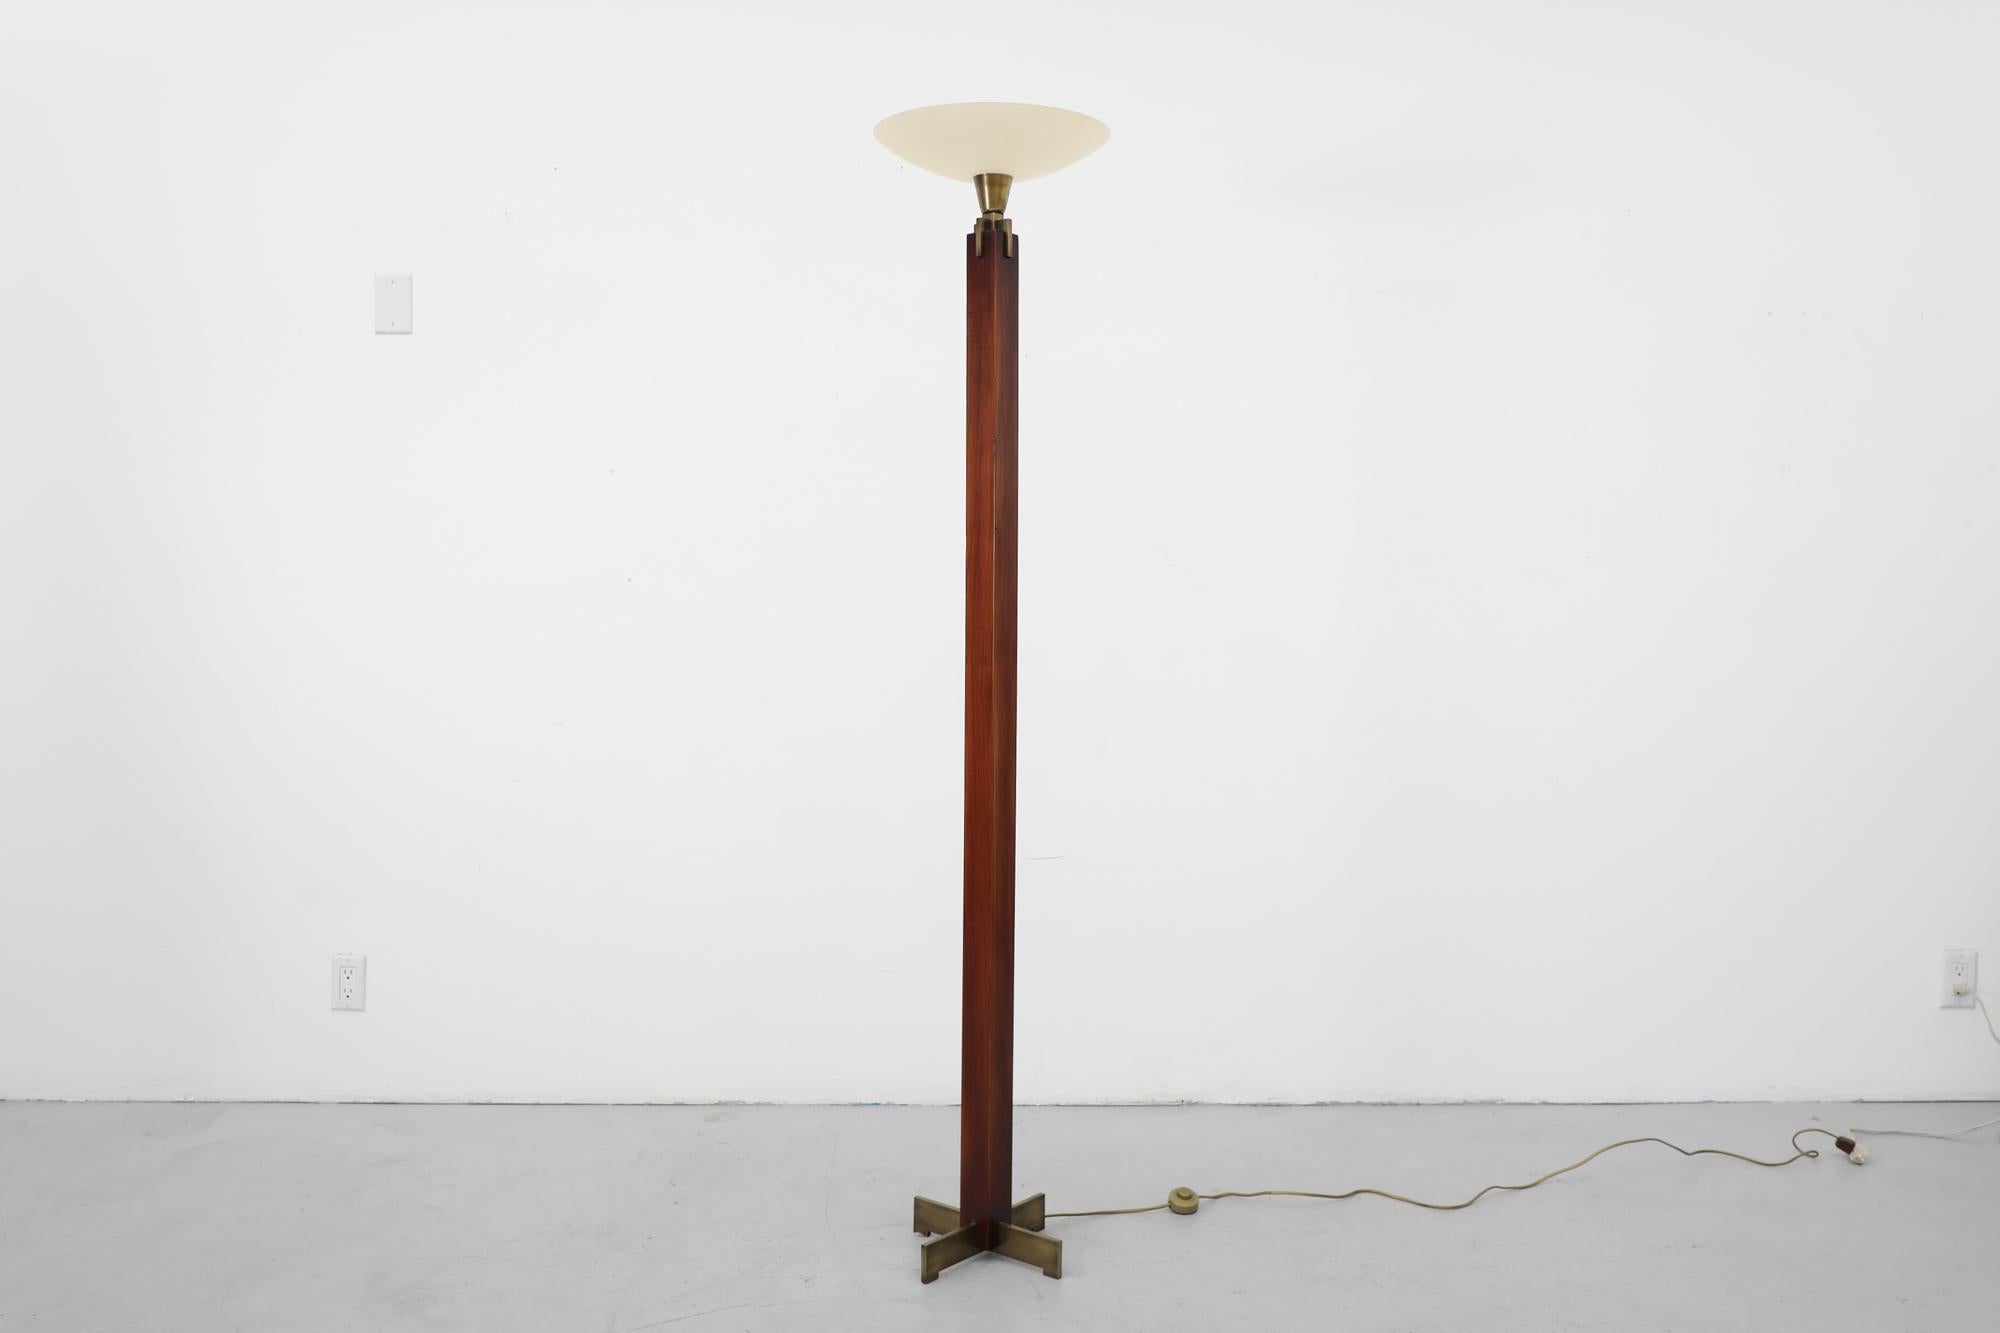 Vintage Art Deco wooden torchiere floor lamp with brass details and frosted glass shade. Shades measure 14.5